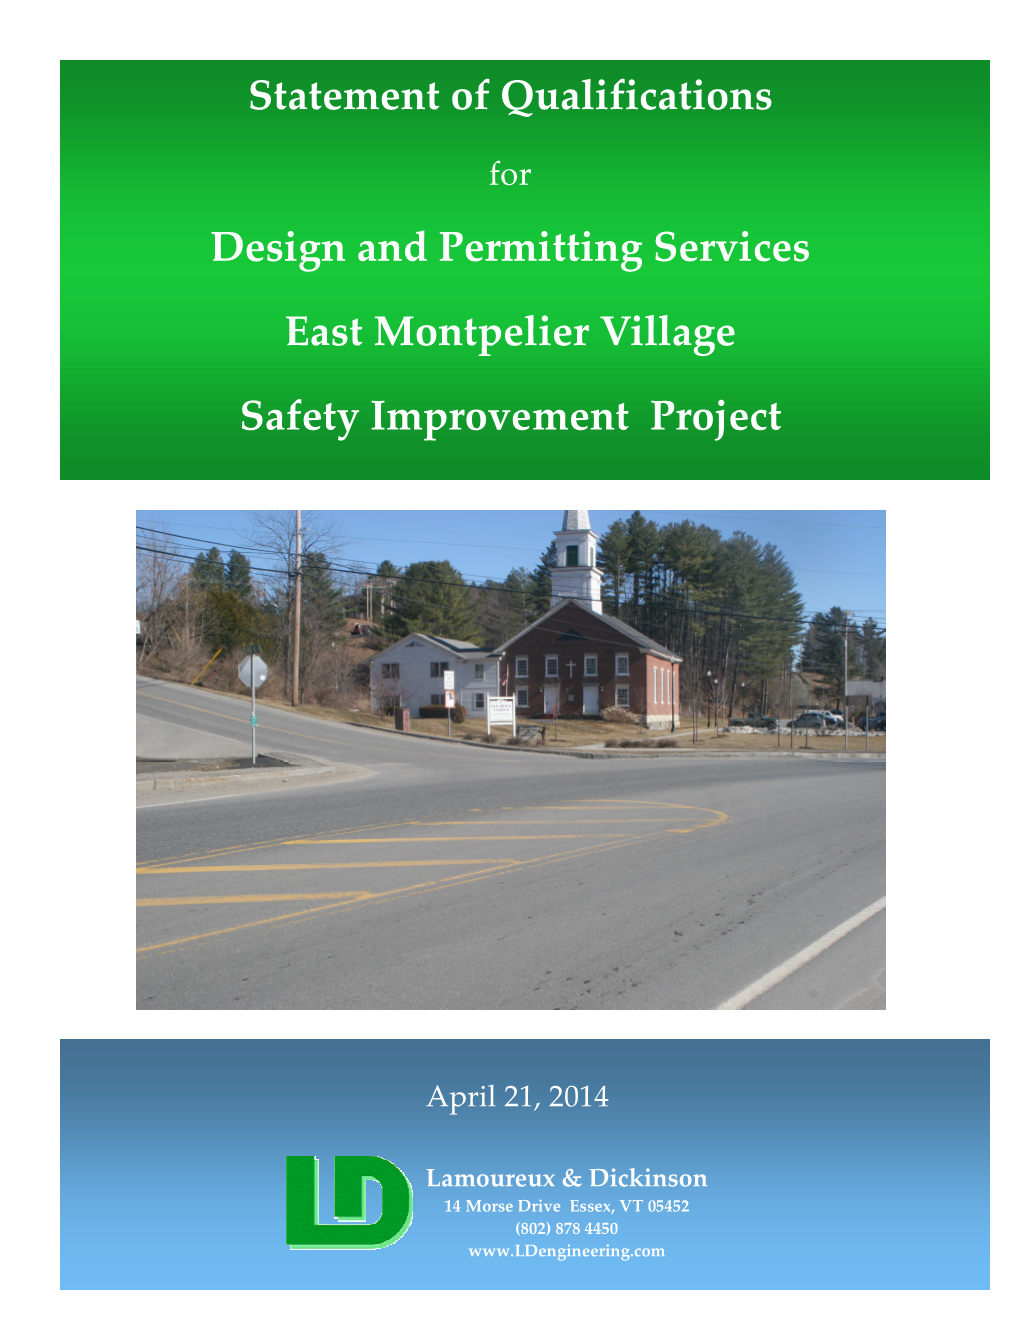 Statement of Qualifications Design and Permitting Services East Montpelier Village Safety Improvement Project